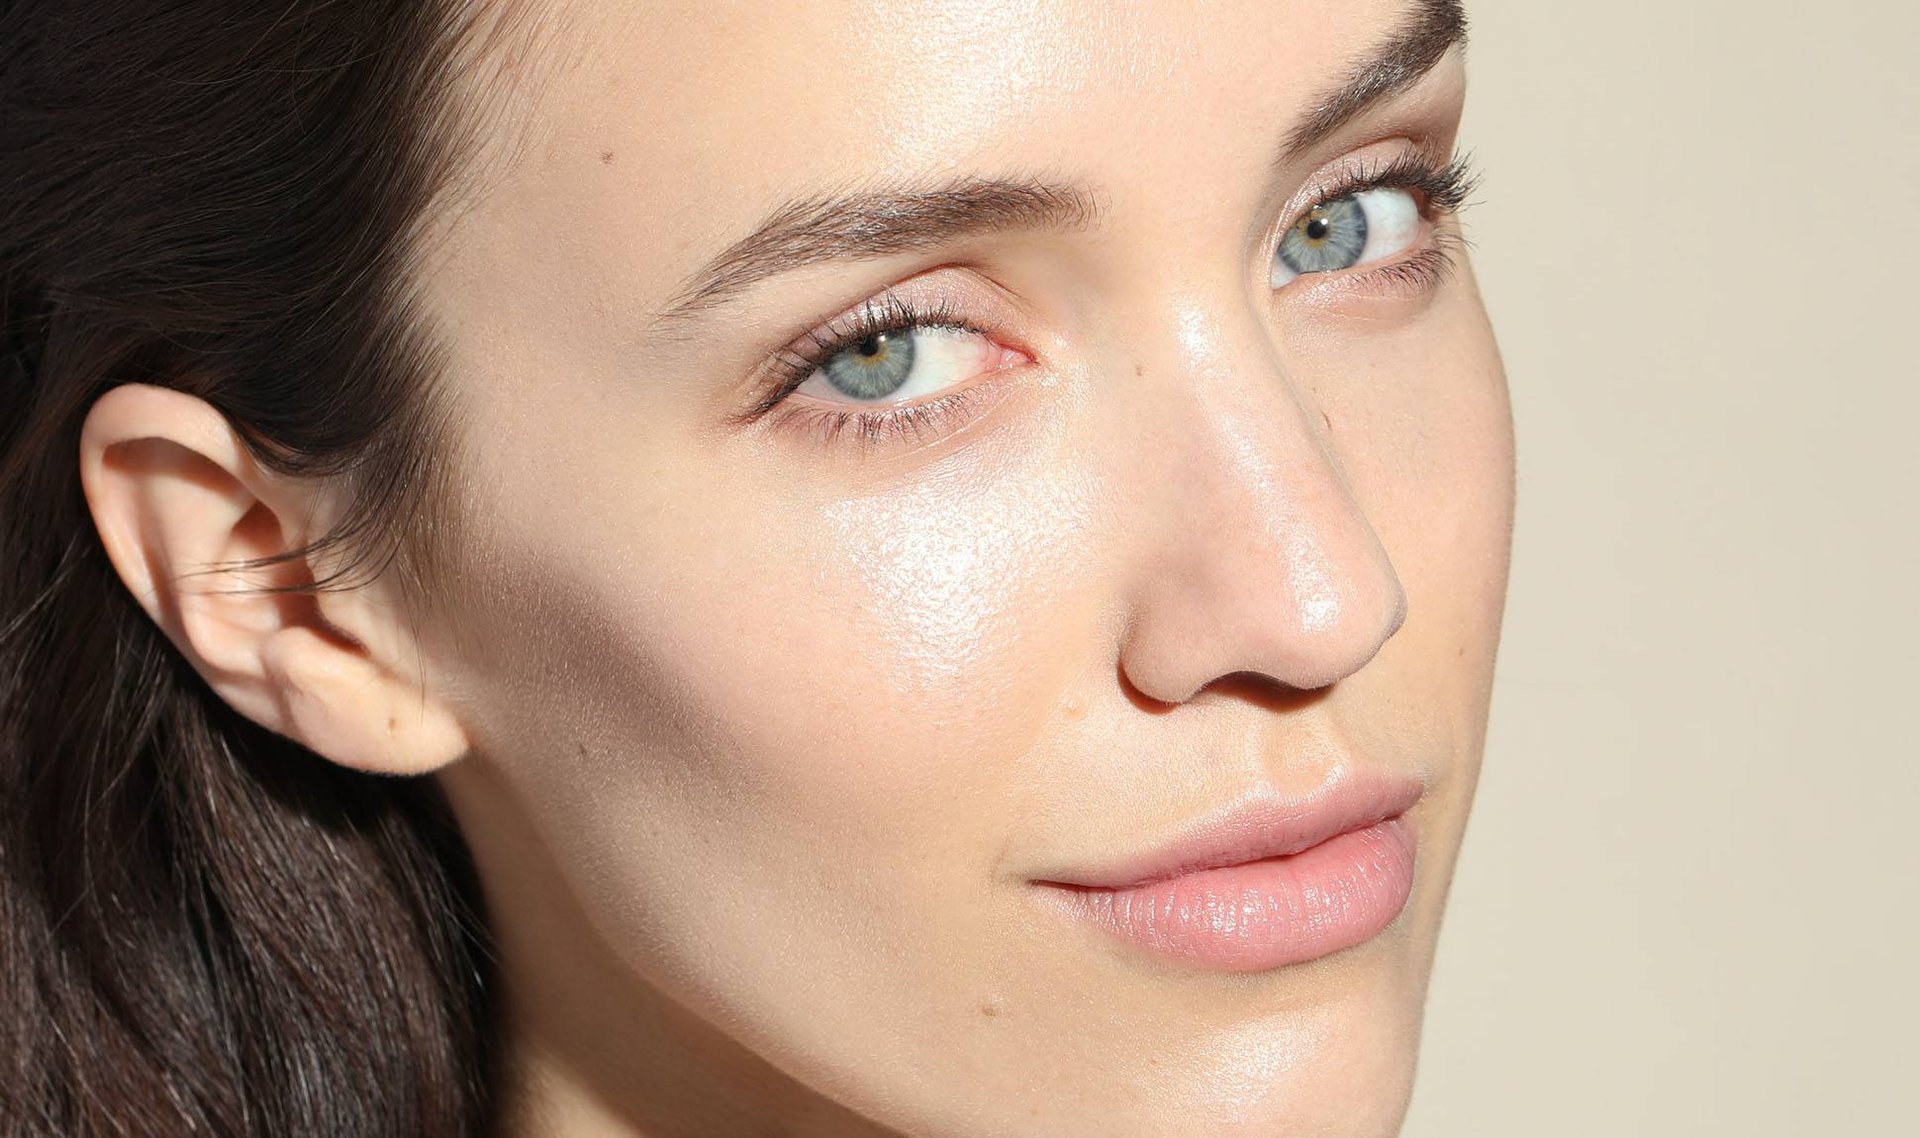 How to Prevent Blackheads, According to a Dermatologist